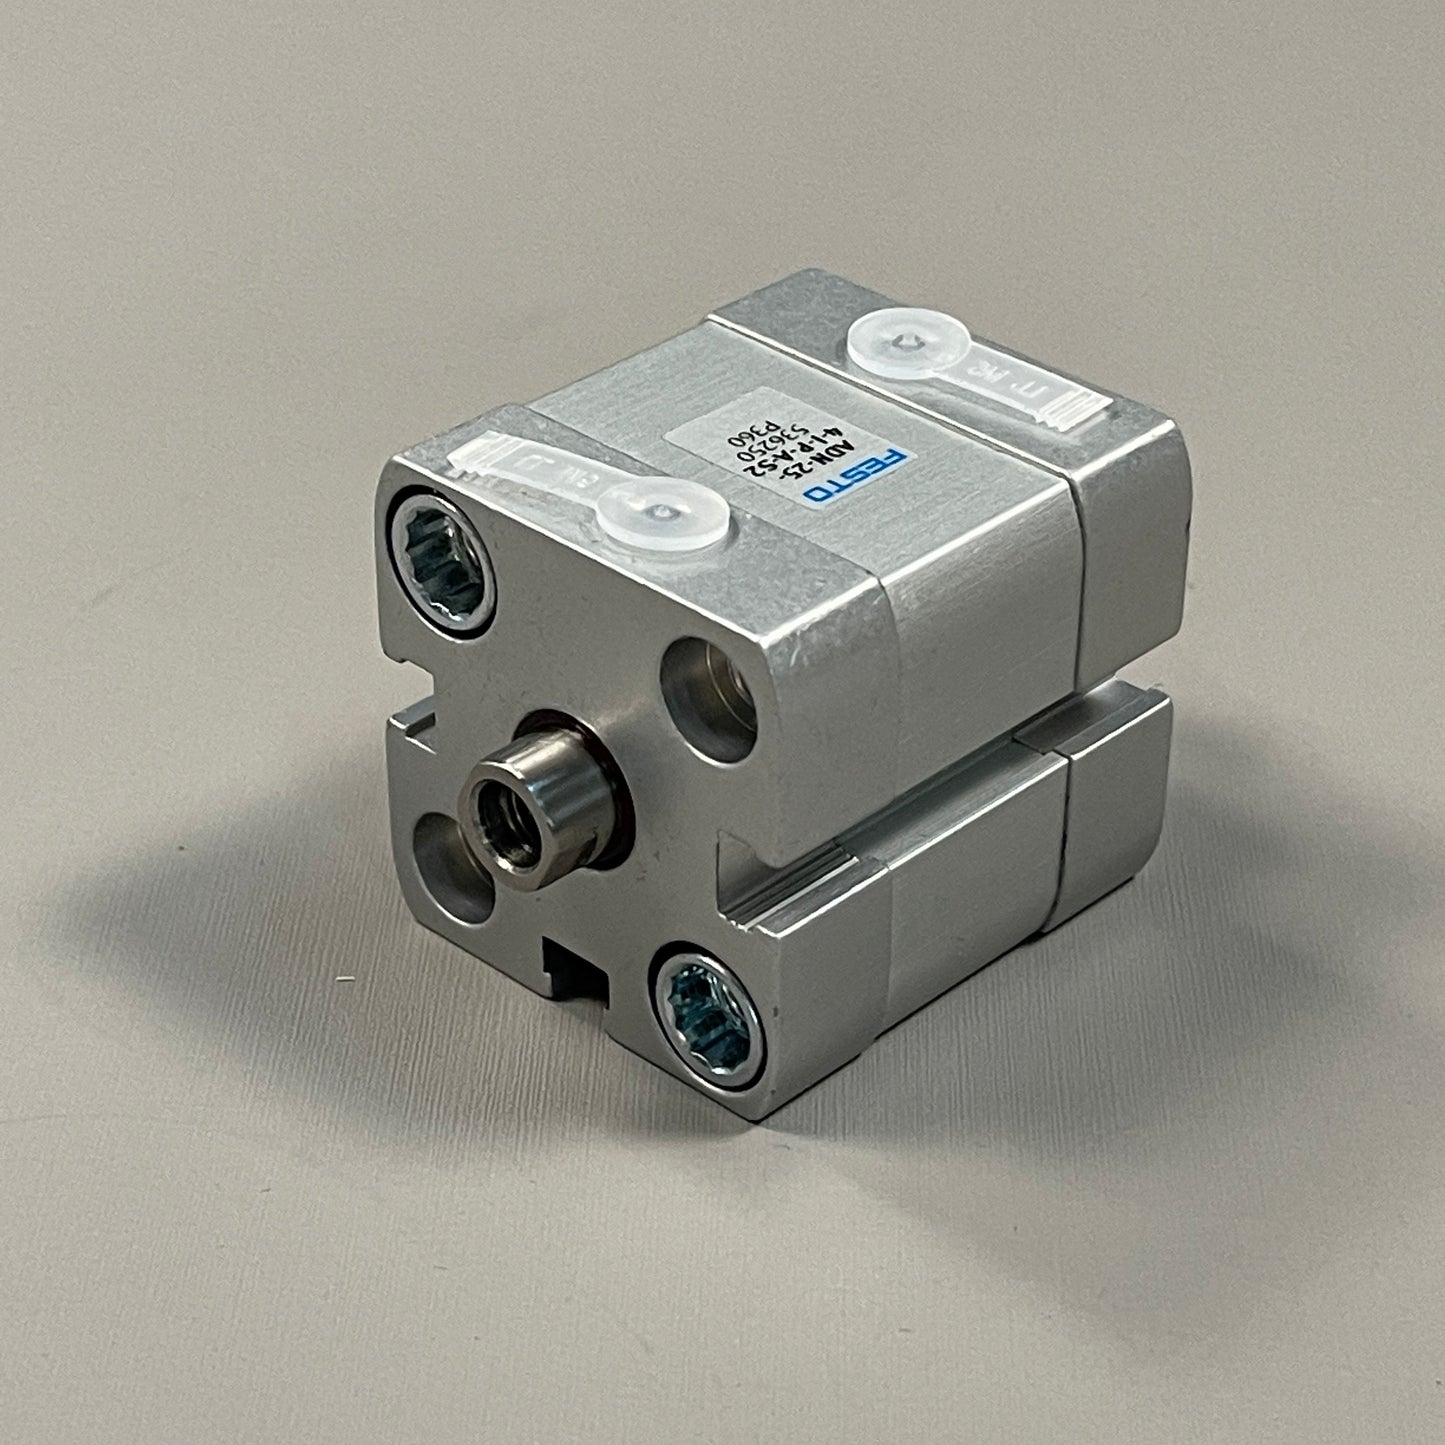 FESTO Compact Air Cylinder 25 Piston Dia. 4 Stroke Double Acting ADN-25-4-I-P-A-52 (New)